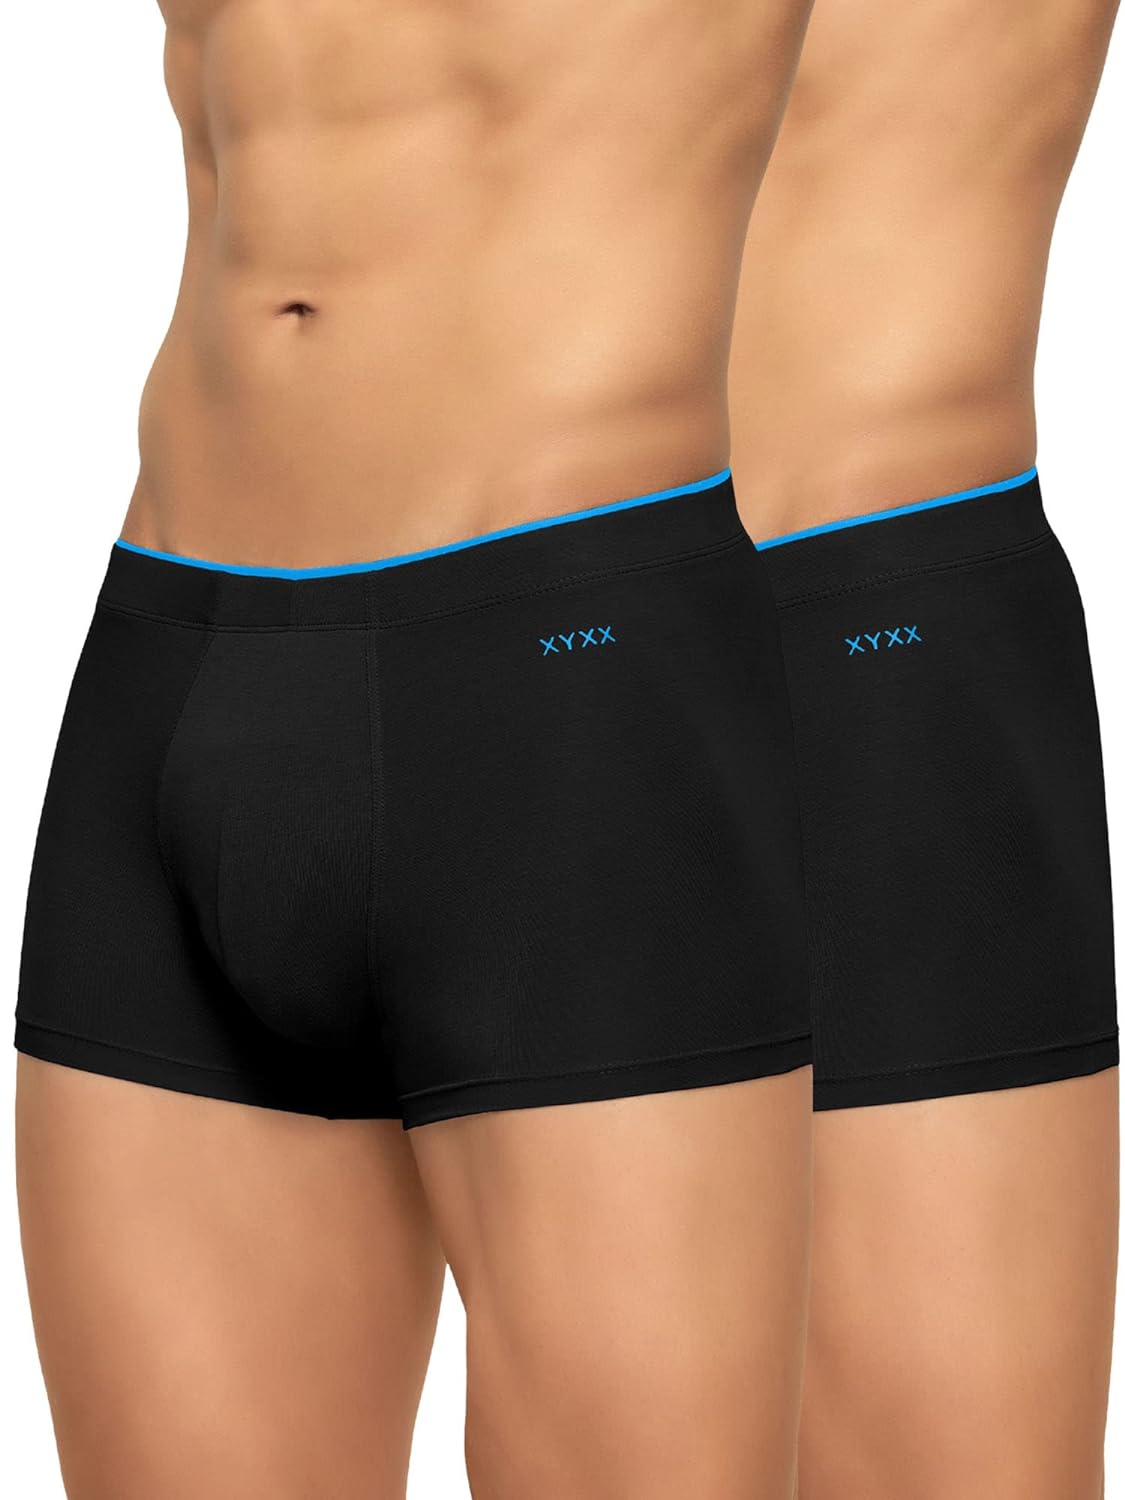 XYXX Men's Underwear Uno IntelliSoft Antimicrobial Micro Modal Trunk Pack of 2